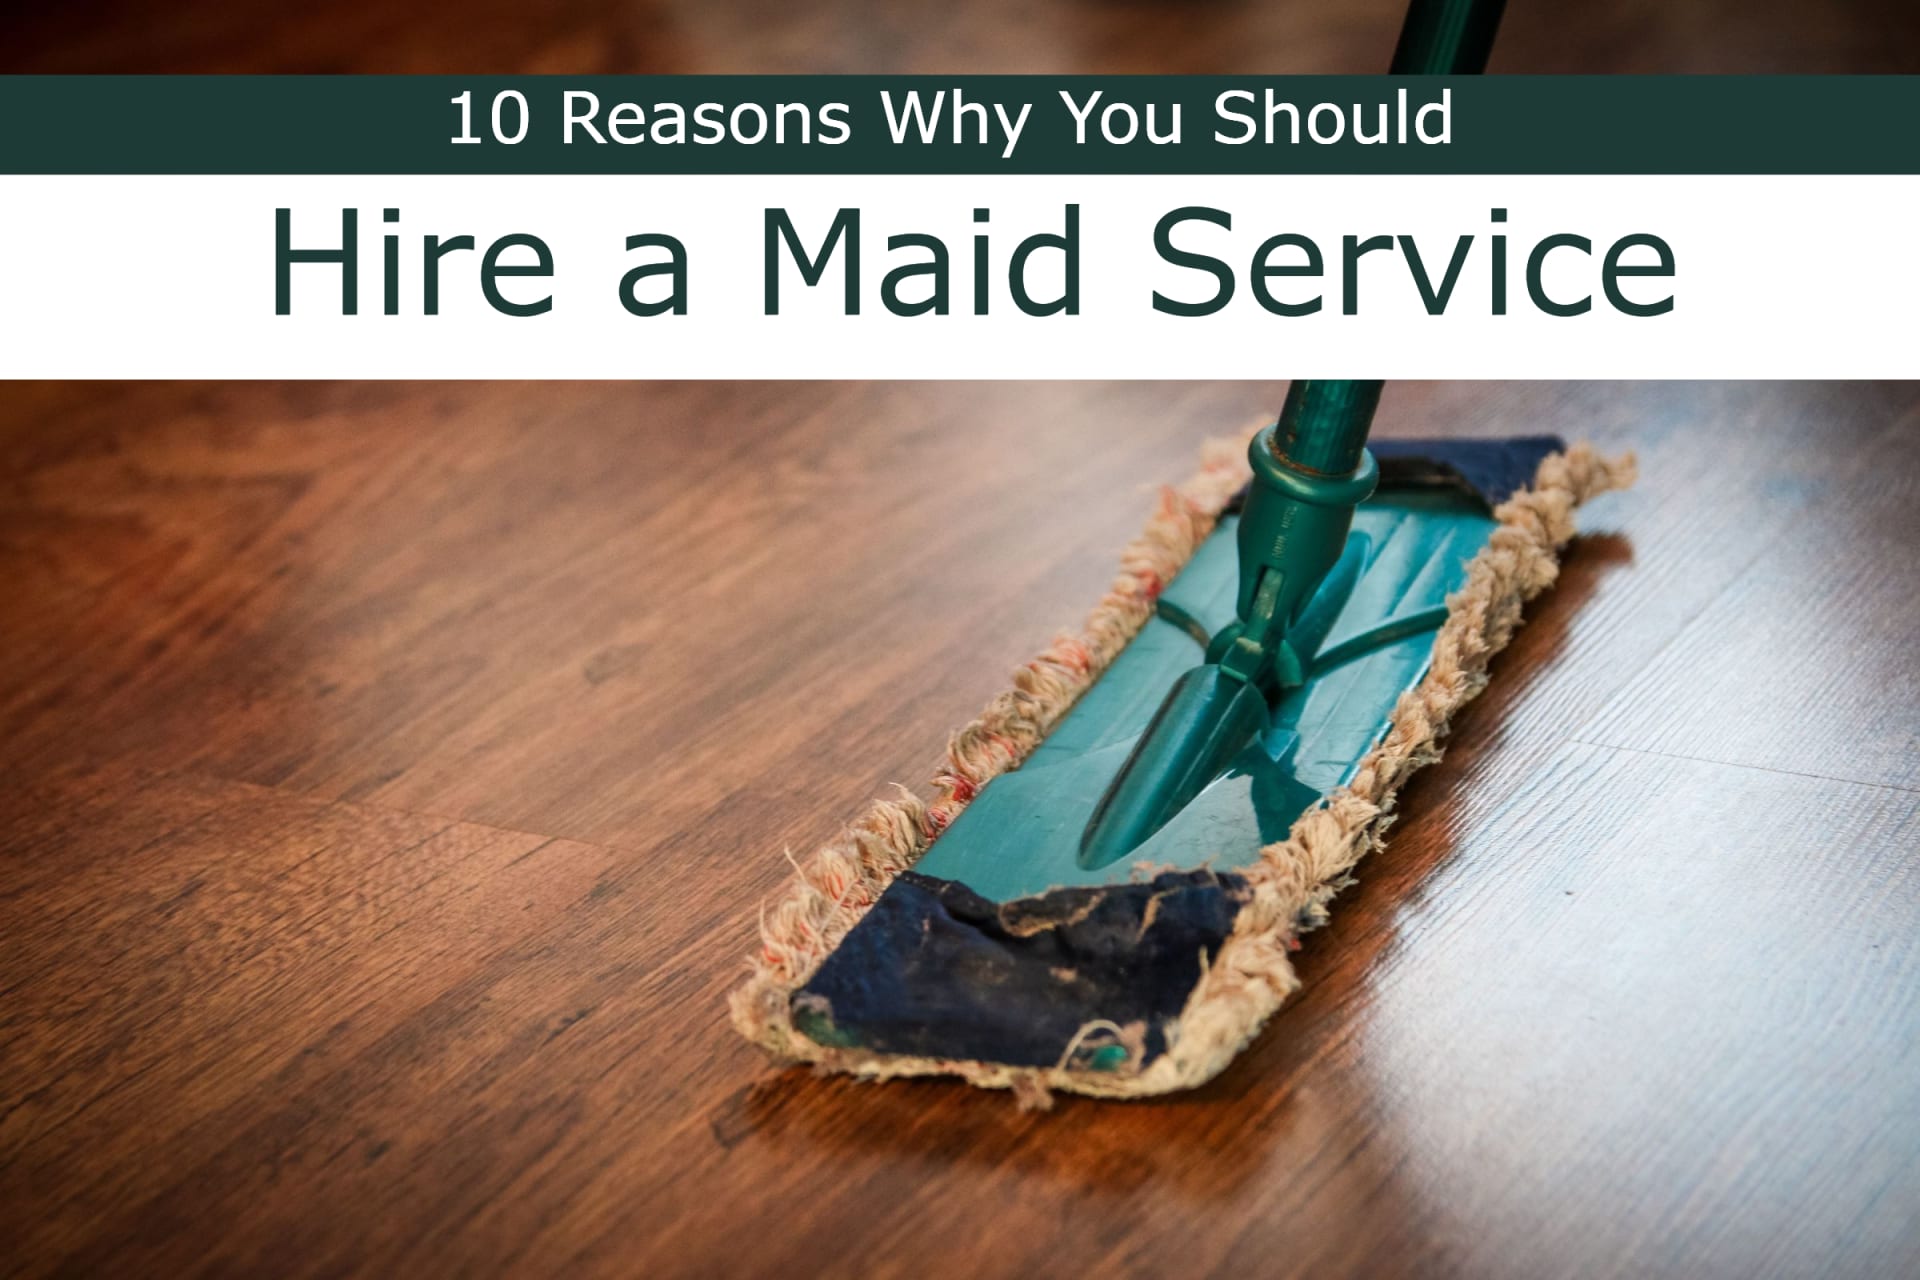 10 Reasons Why You Should Hire a Maid Service